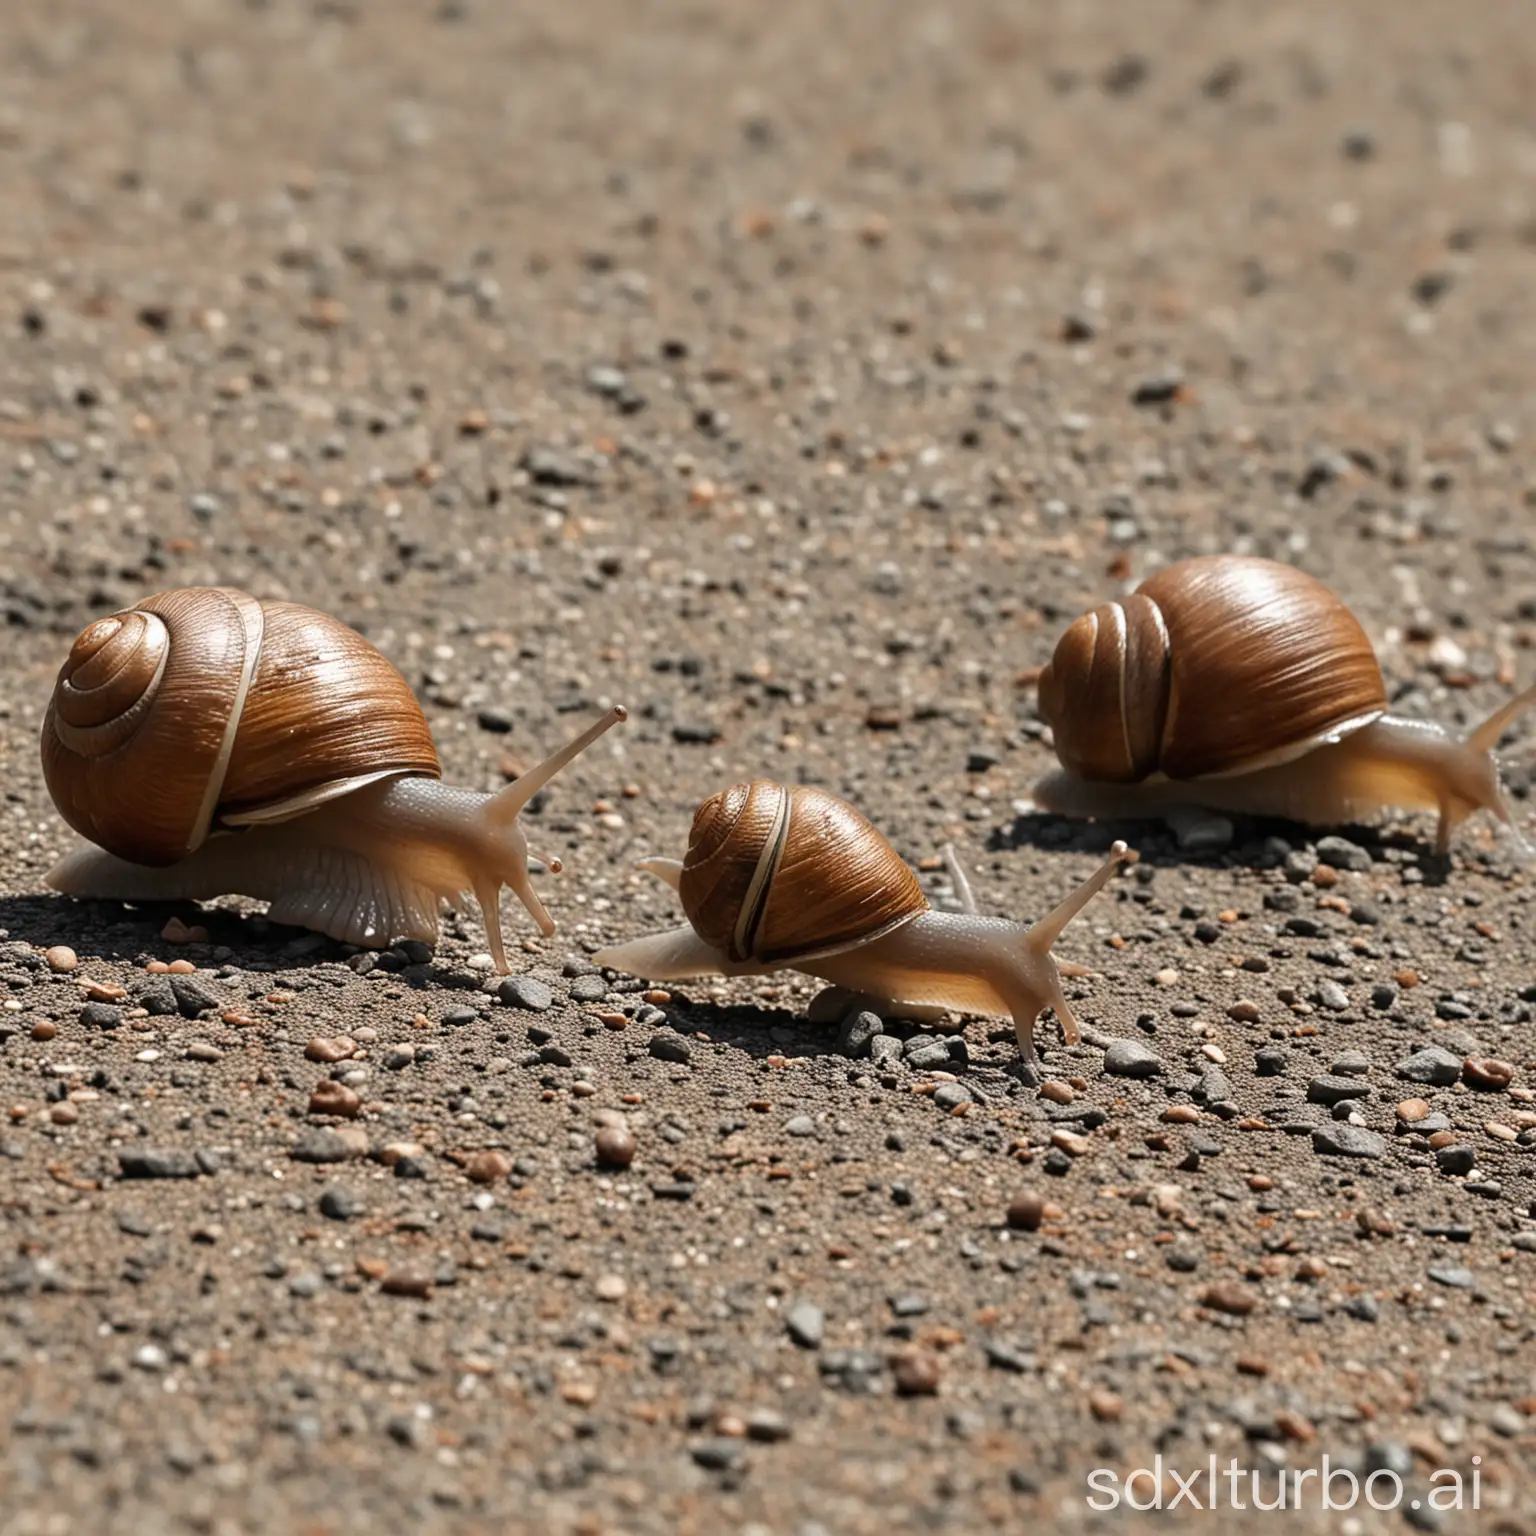 Snail army chasing ,shot from the front